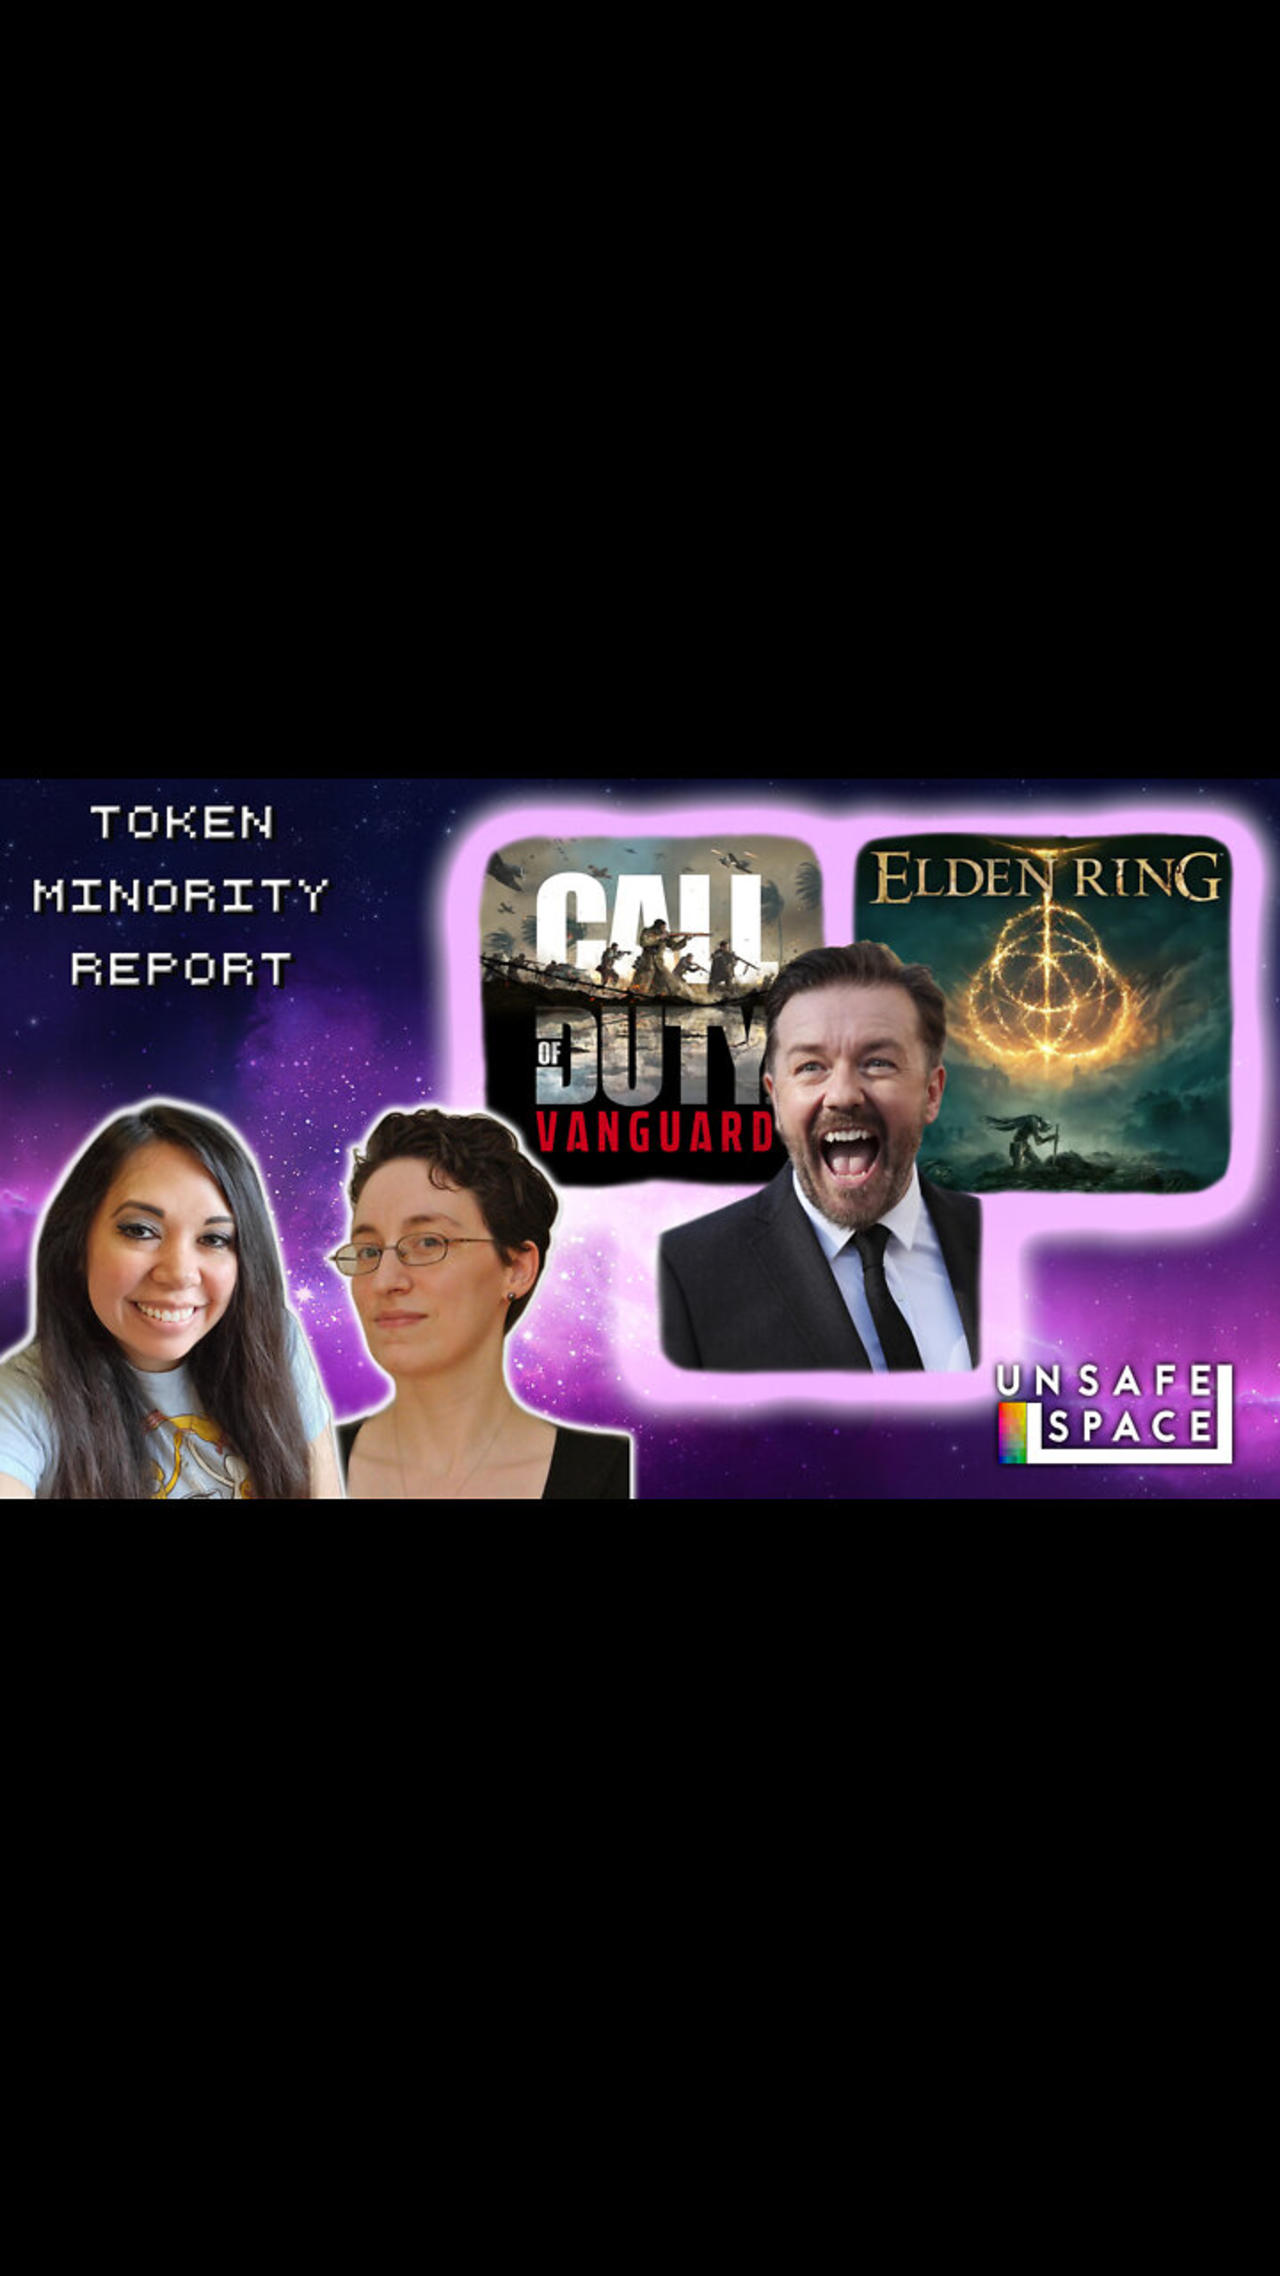 LIVE! [TMR] Ricky Gervais’ Trans Joke, Call of Duty vs. Elden Ring, and My D&D Campaign